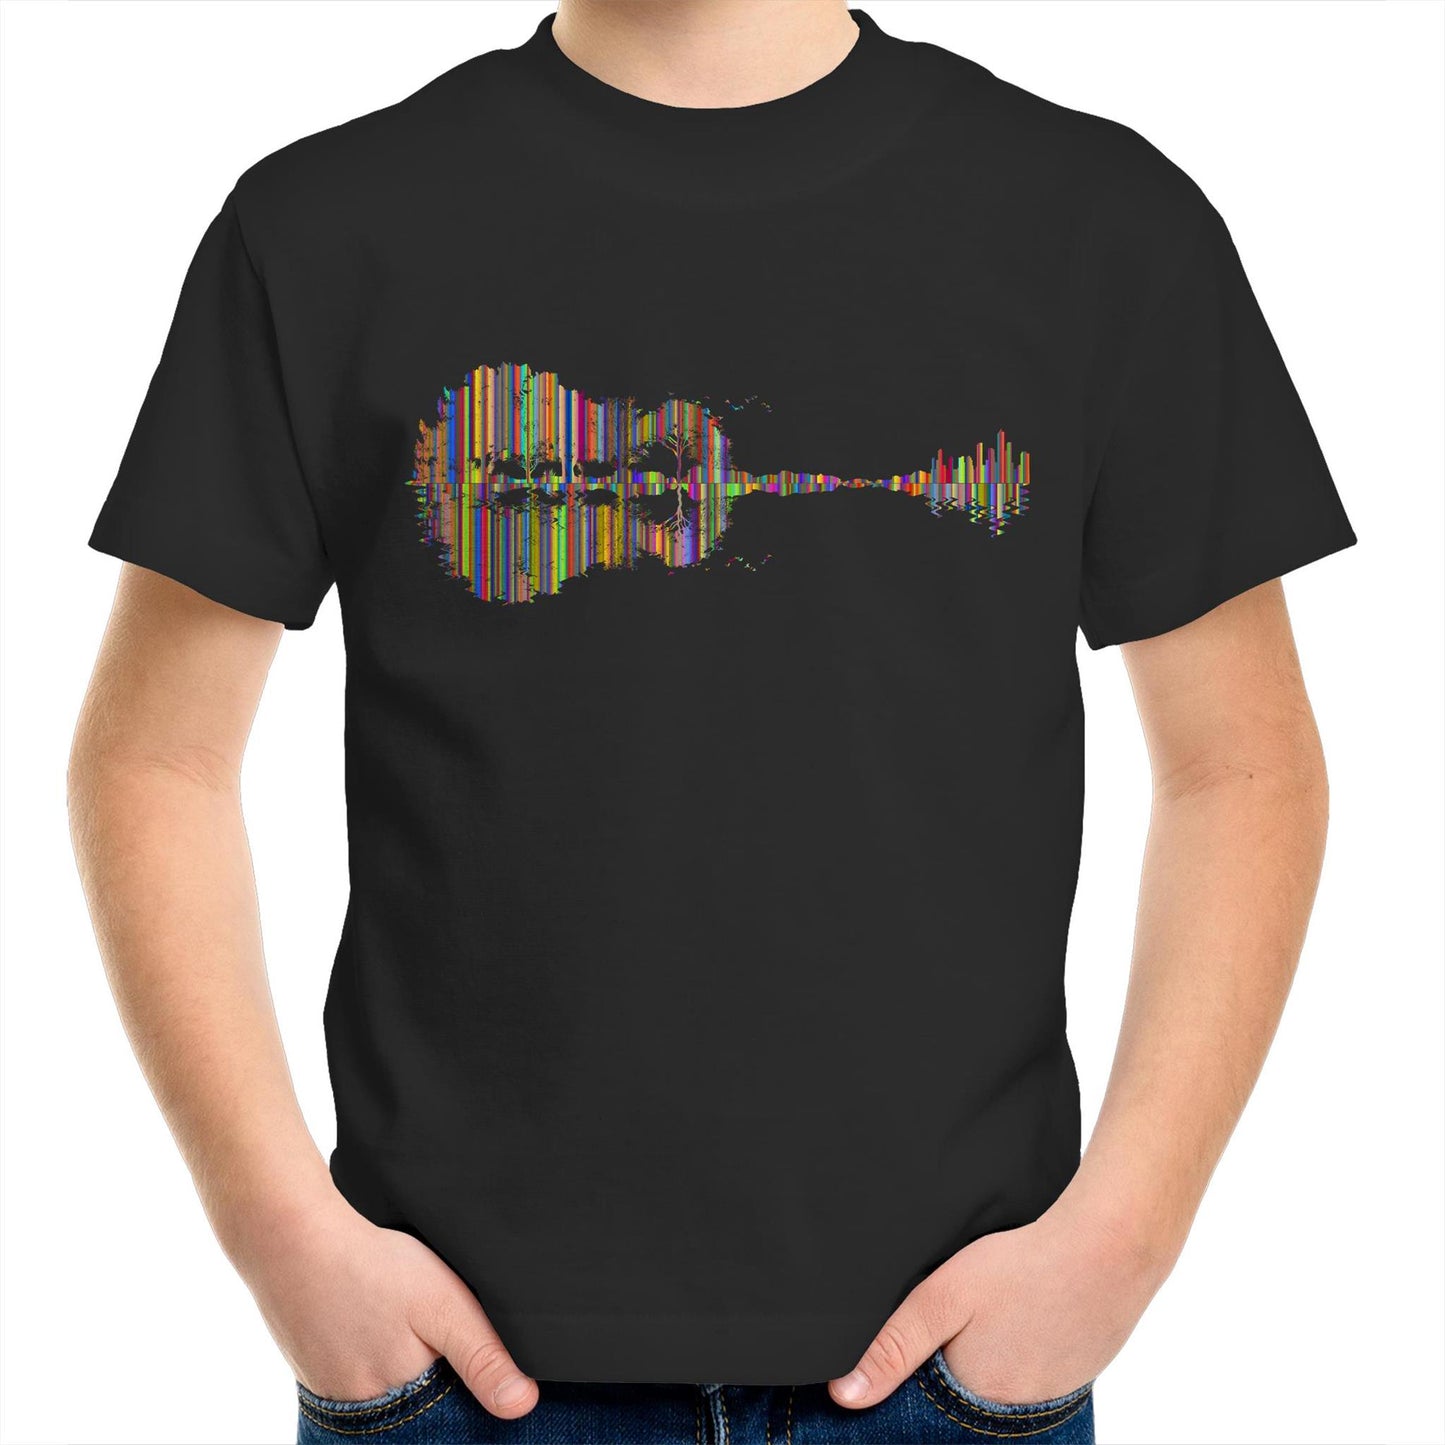 Guitar Reflection In Colour - Kids Youth Crew T-Shirt Black Kids Youth T-shirt Music